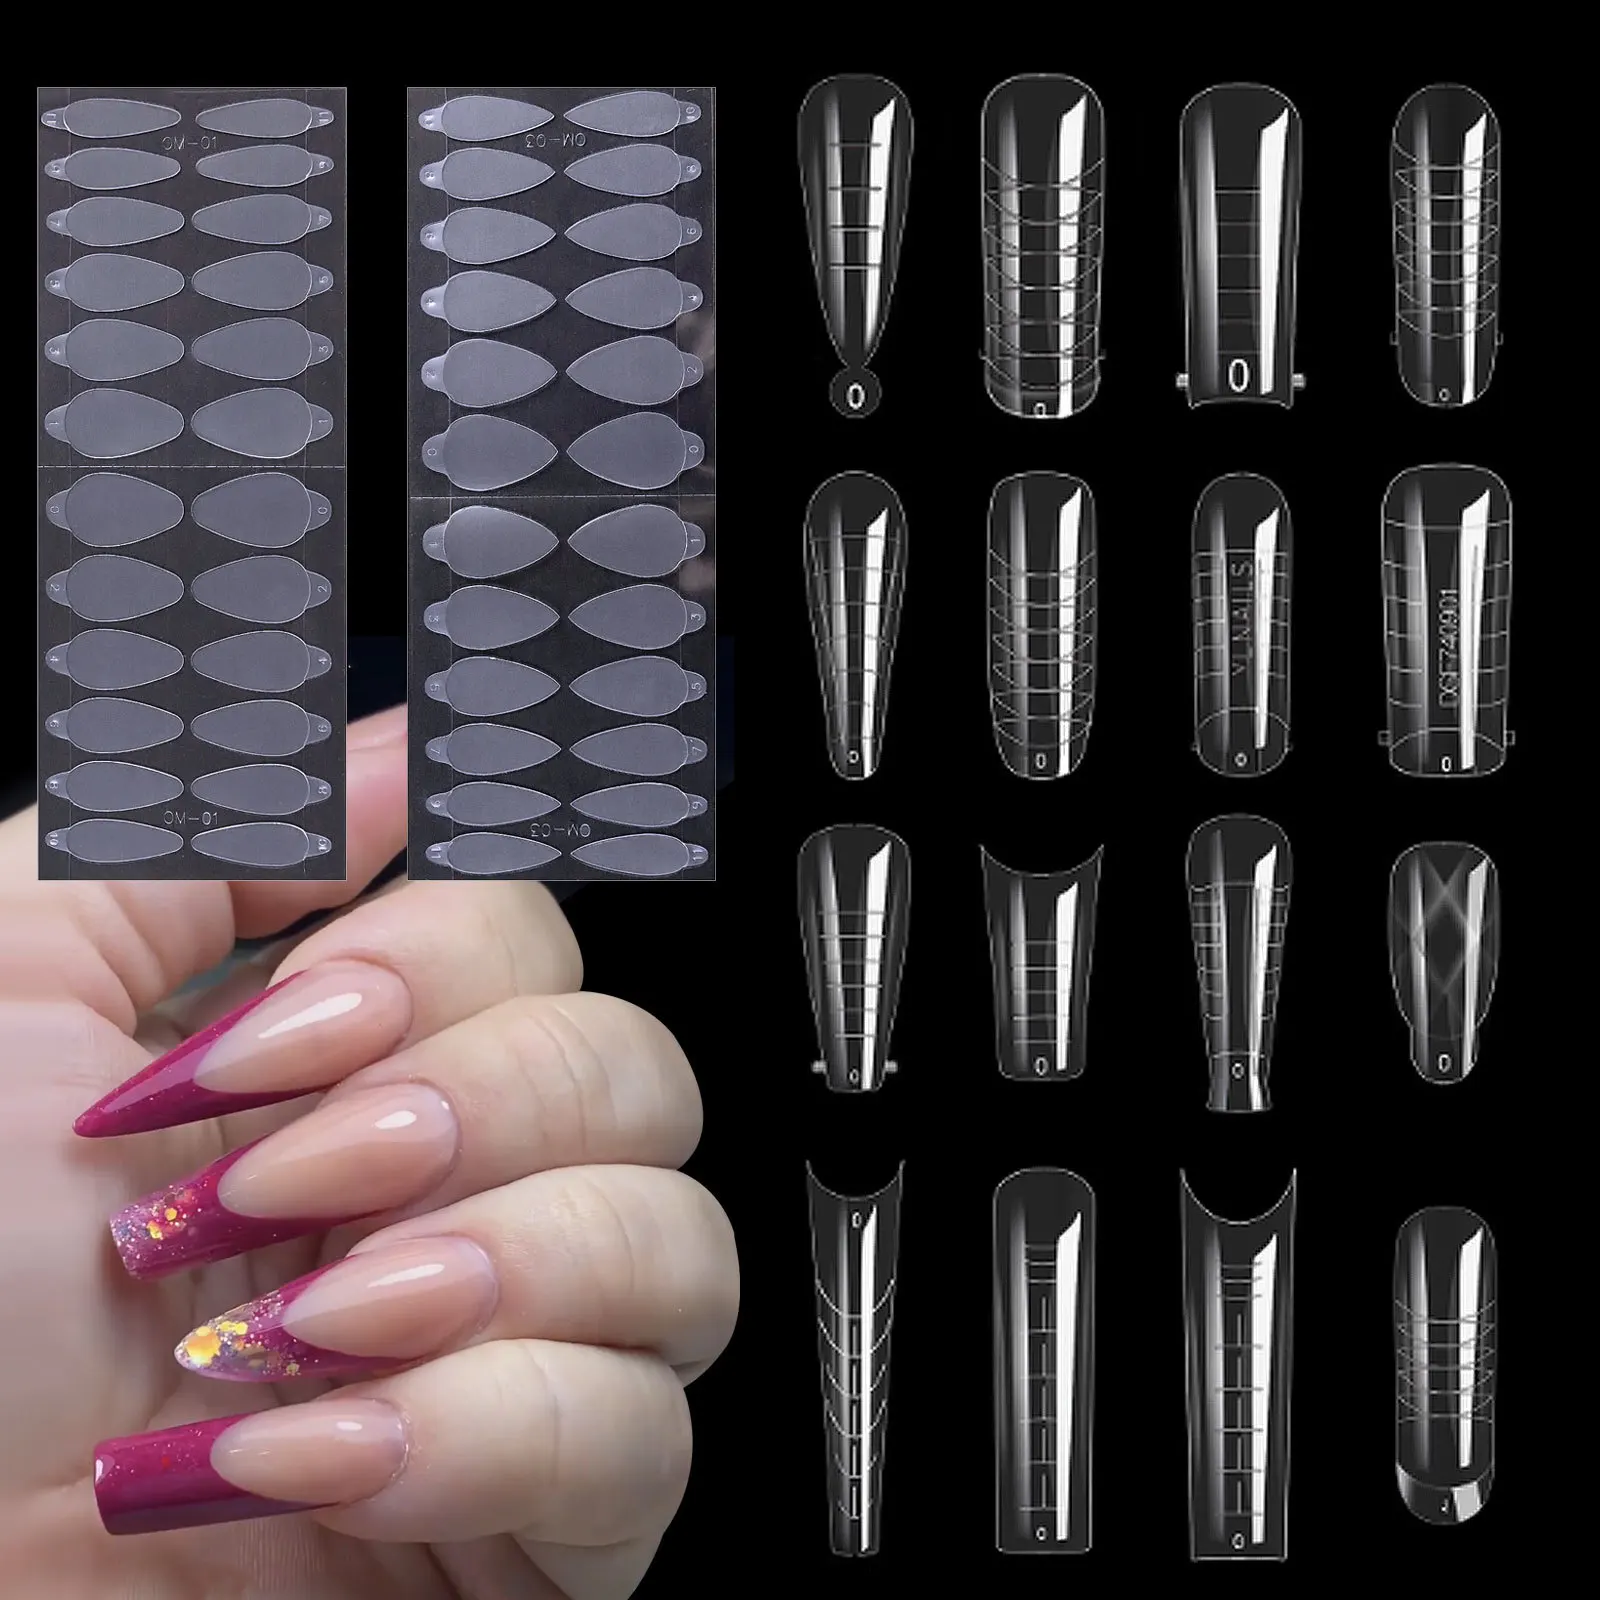 

24pcs Nail Form Supplies For Poly UV Gel Quick Extension Building Mold Membrane French False Nail Mold Tips AccessorY DIY Salon